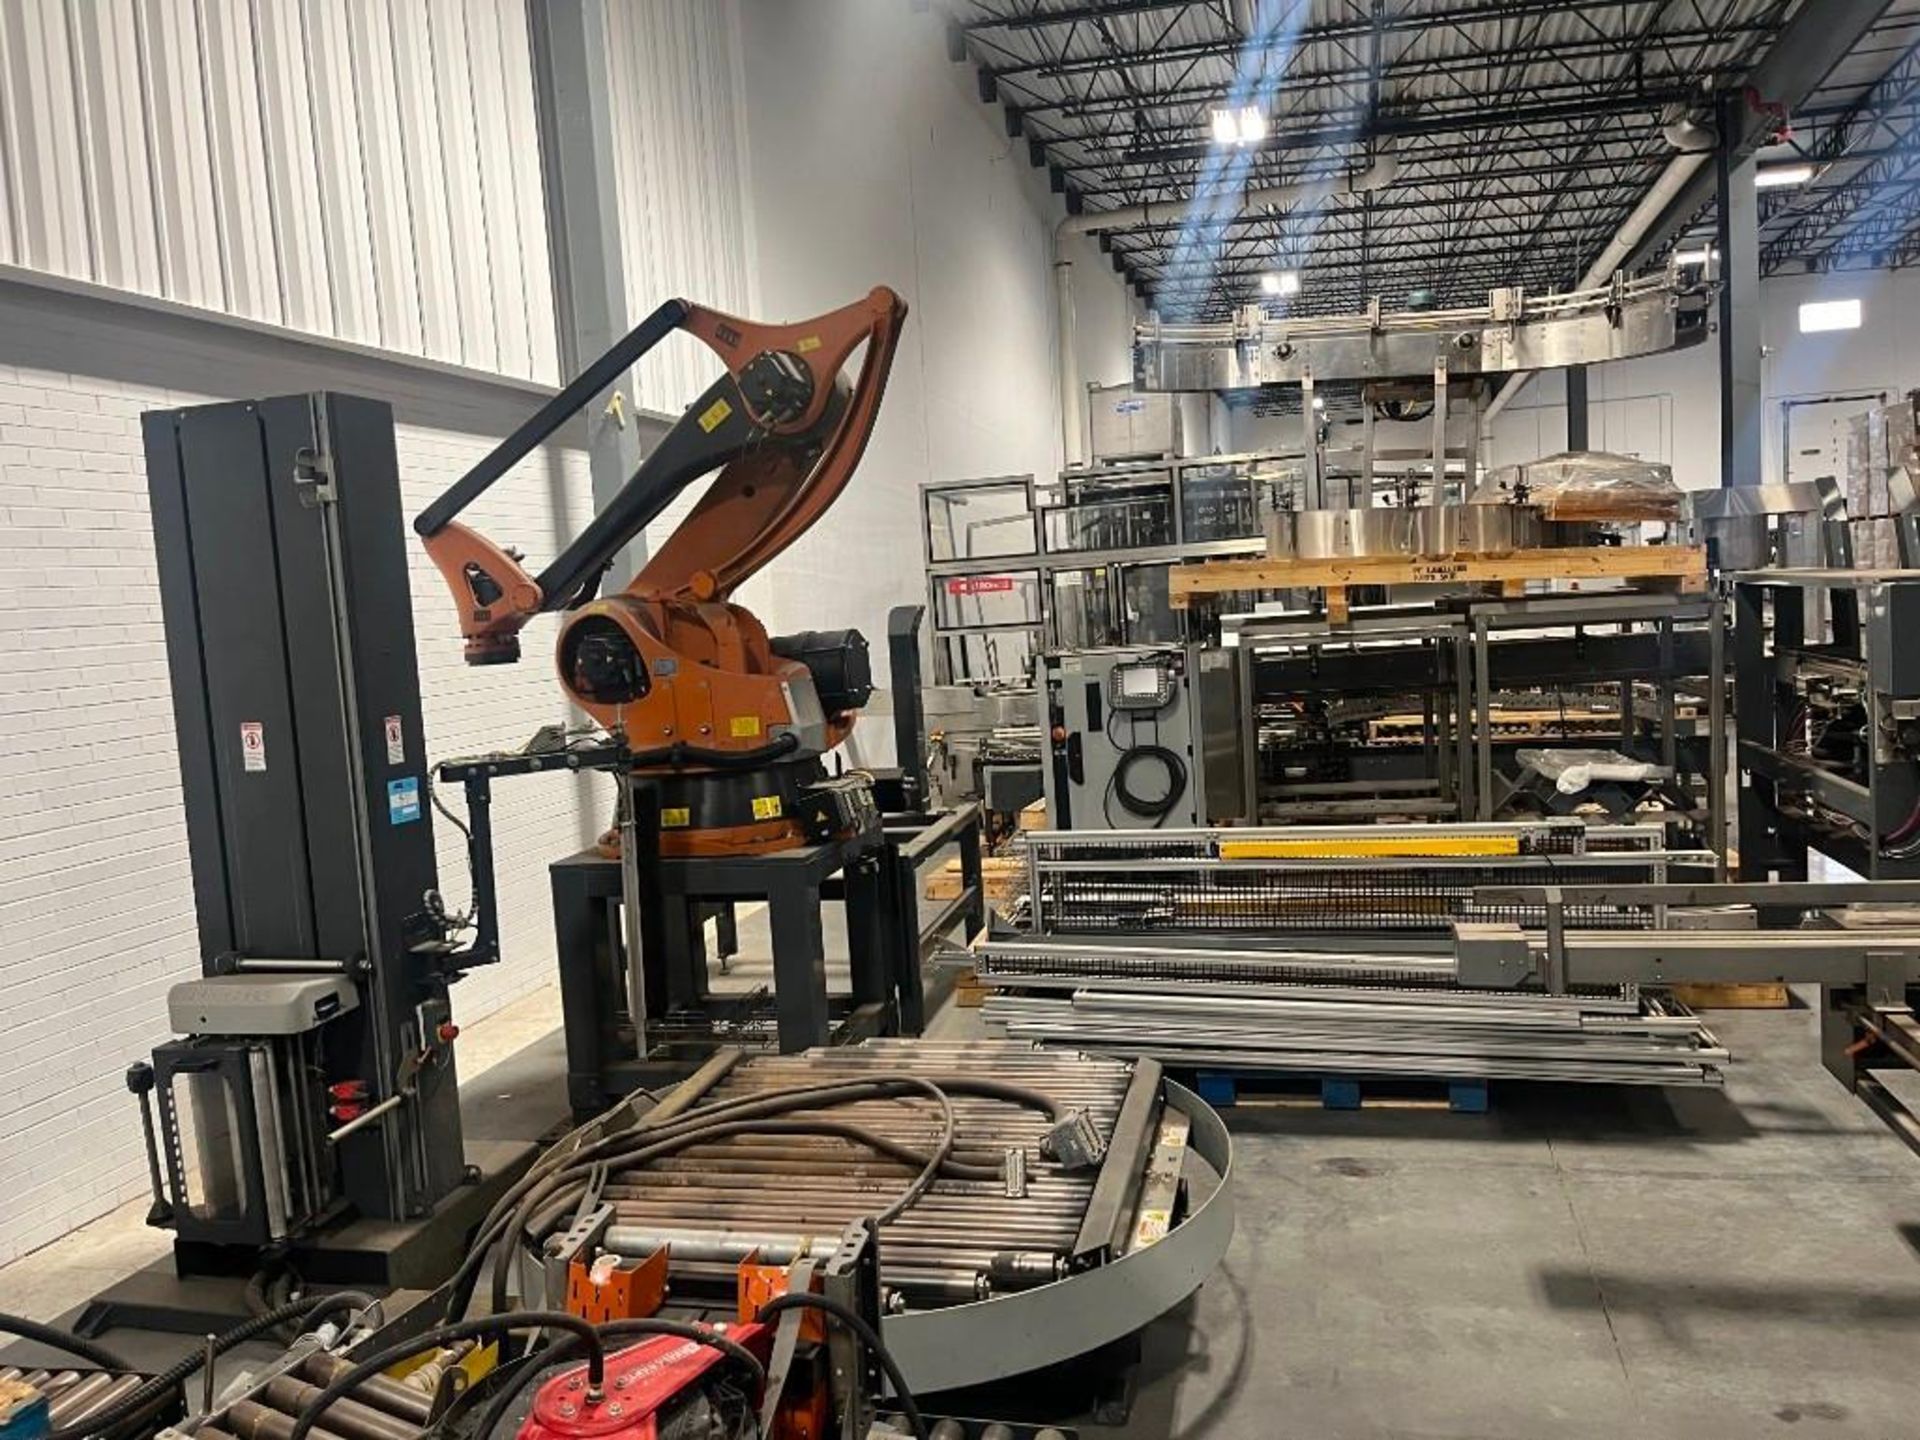 Wulftec/Kuka Robotic Palletizing System, Model ECOPAL. Includes (1) Wulftec automatic stretch wrappe